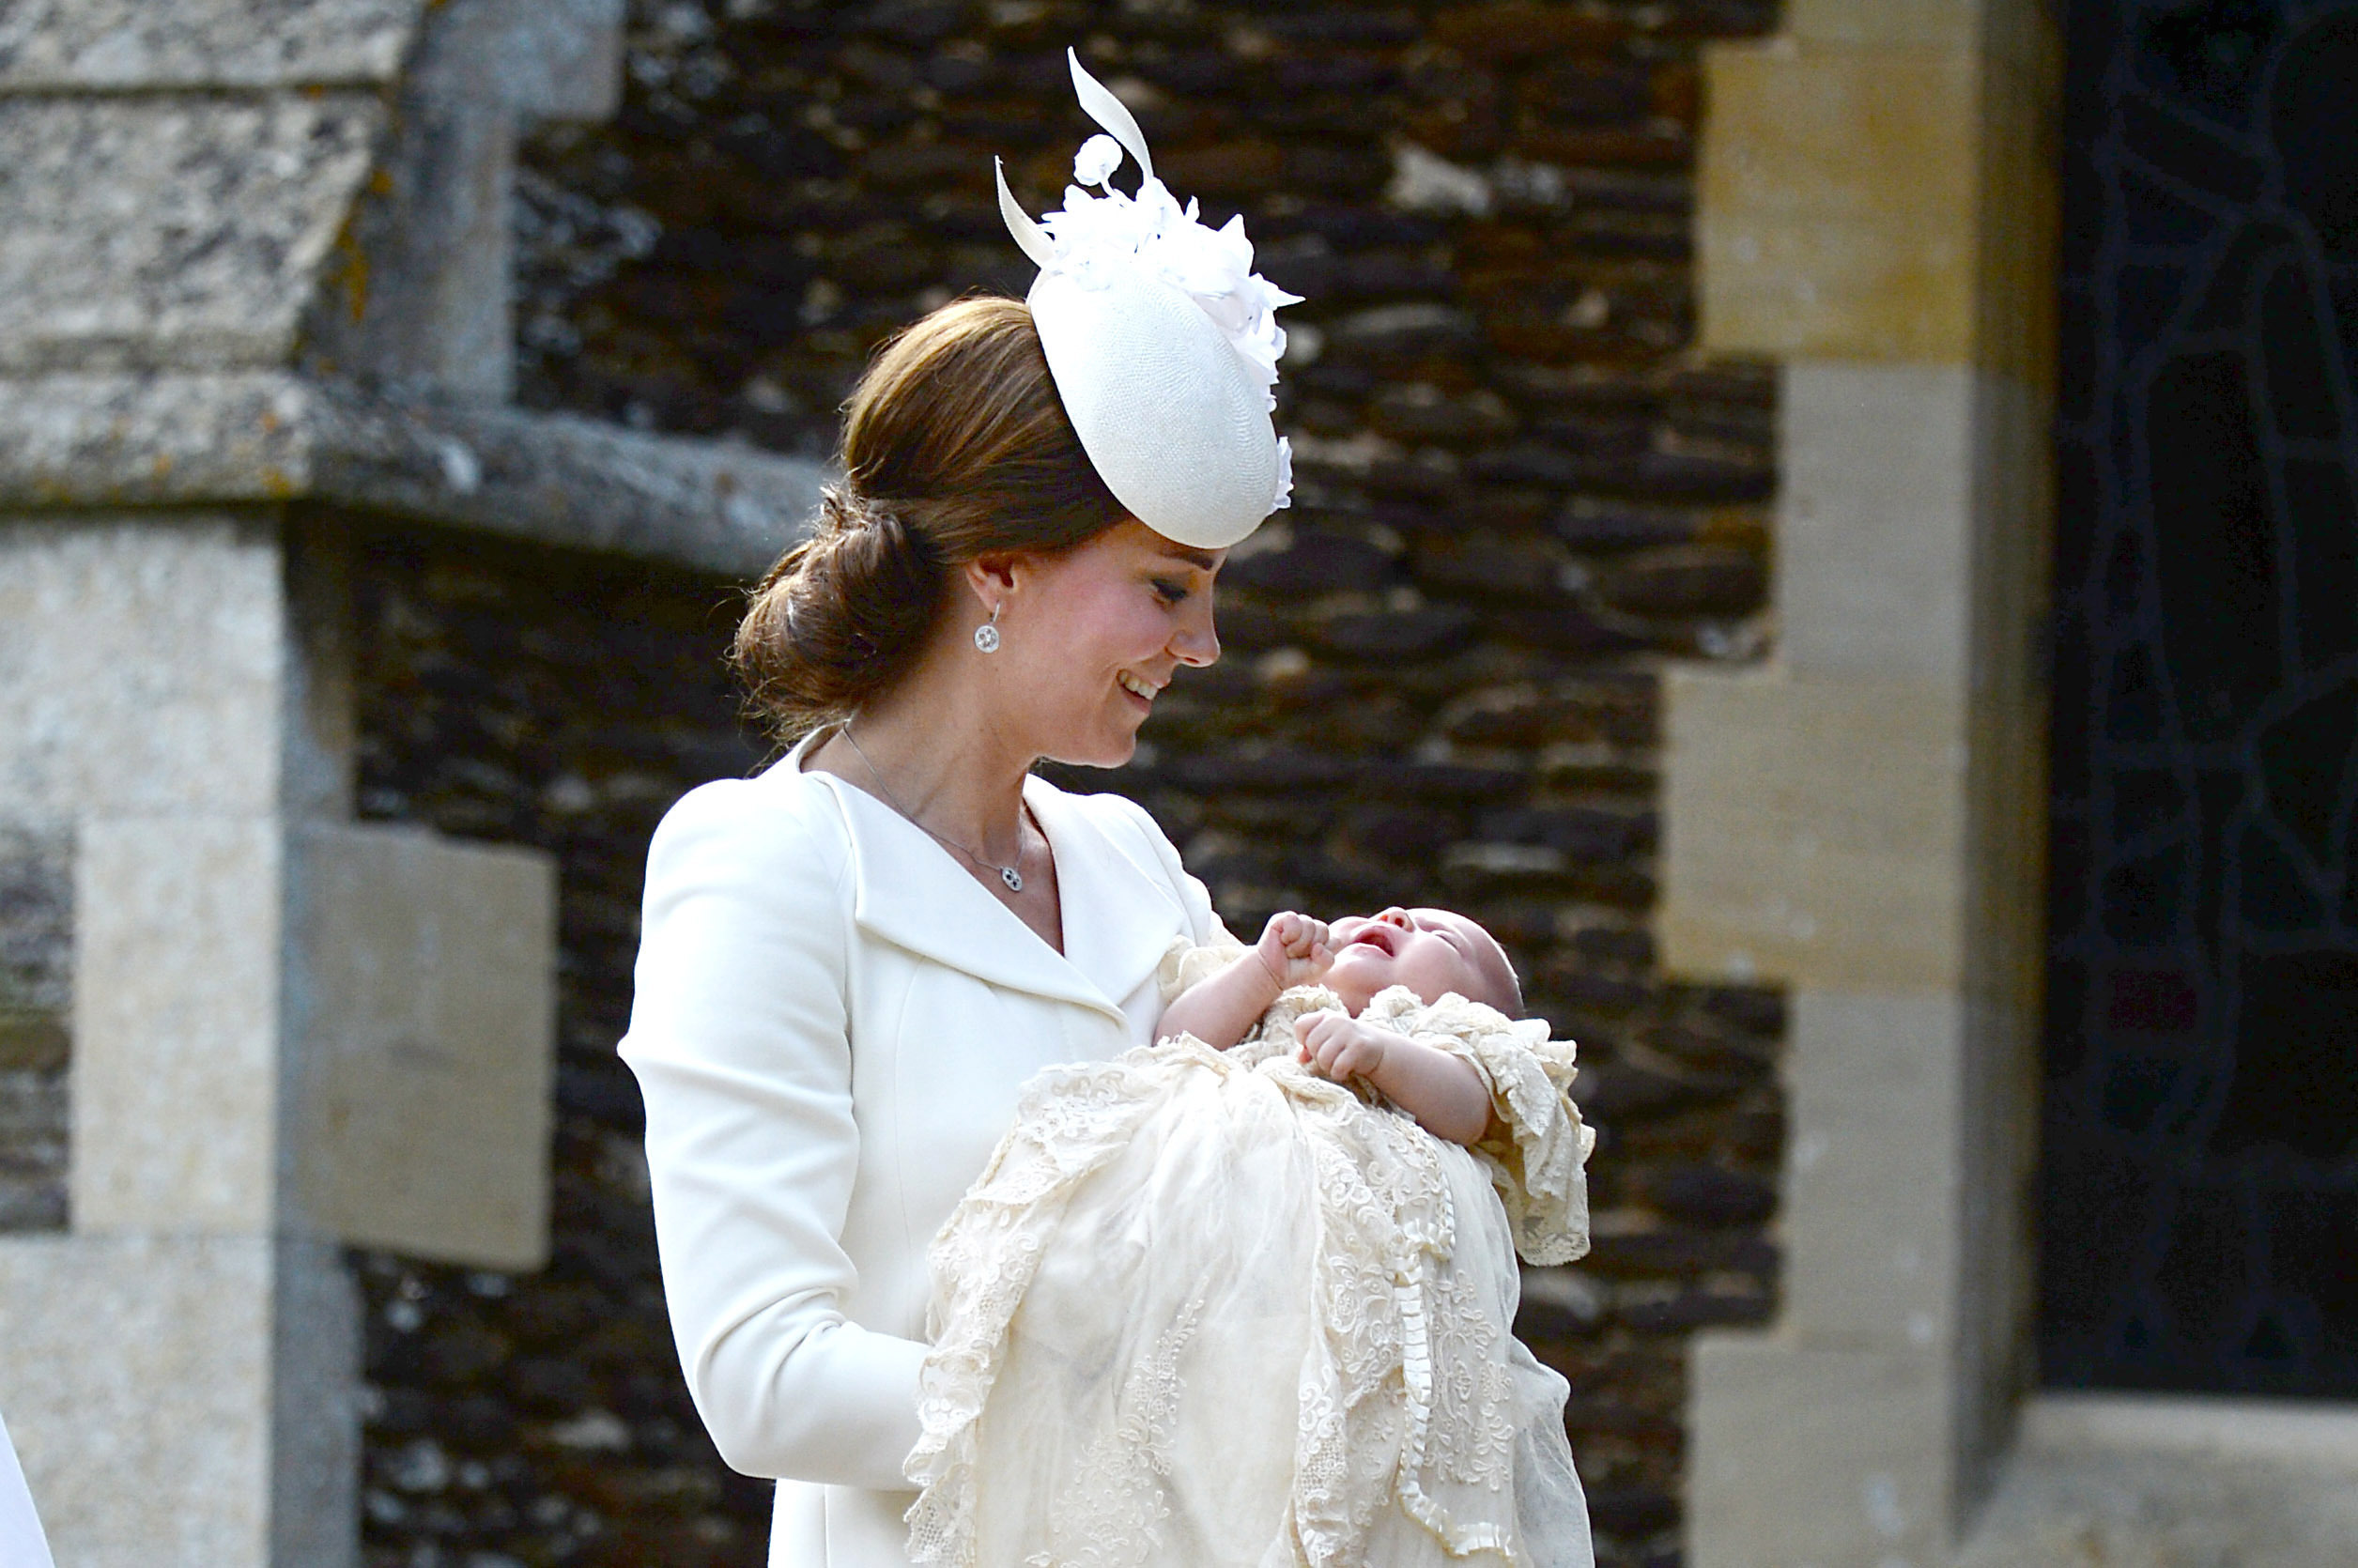 Prince Louis Christening gown and robe details revealed